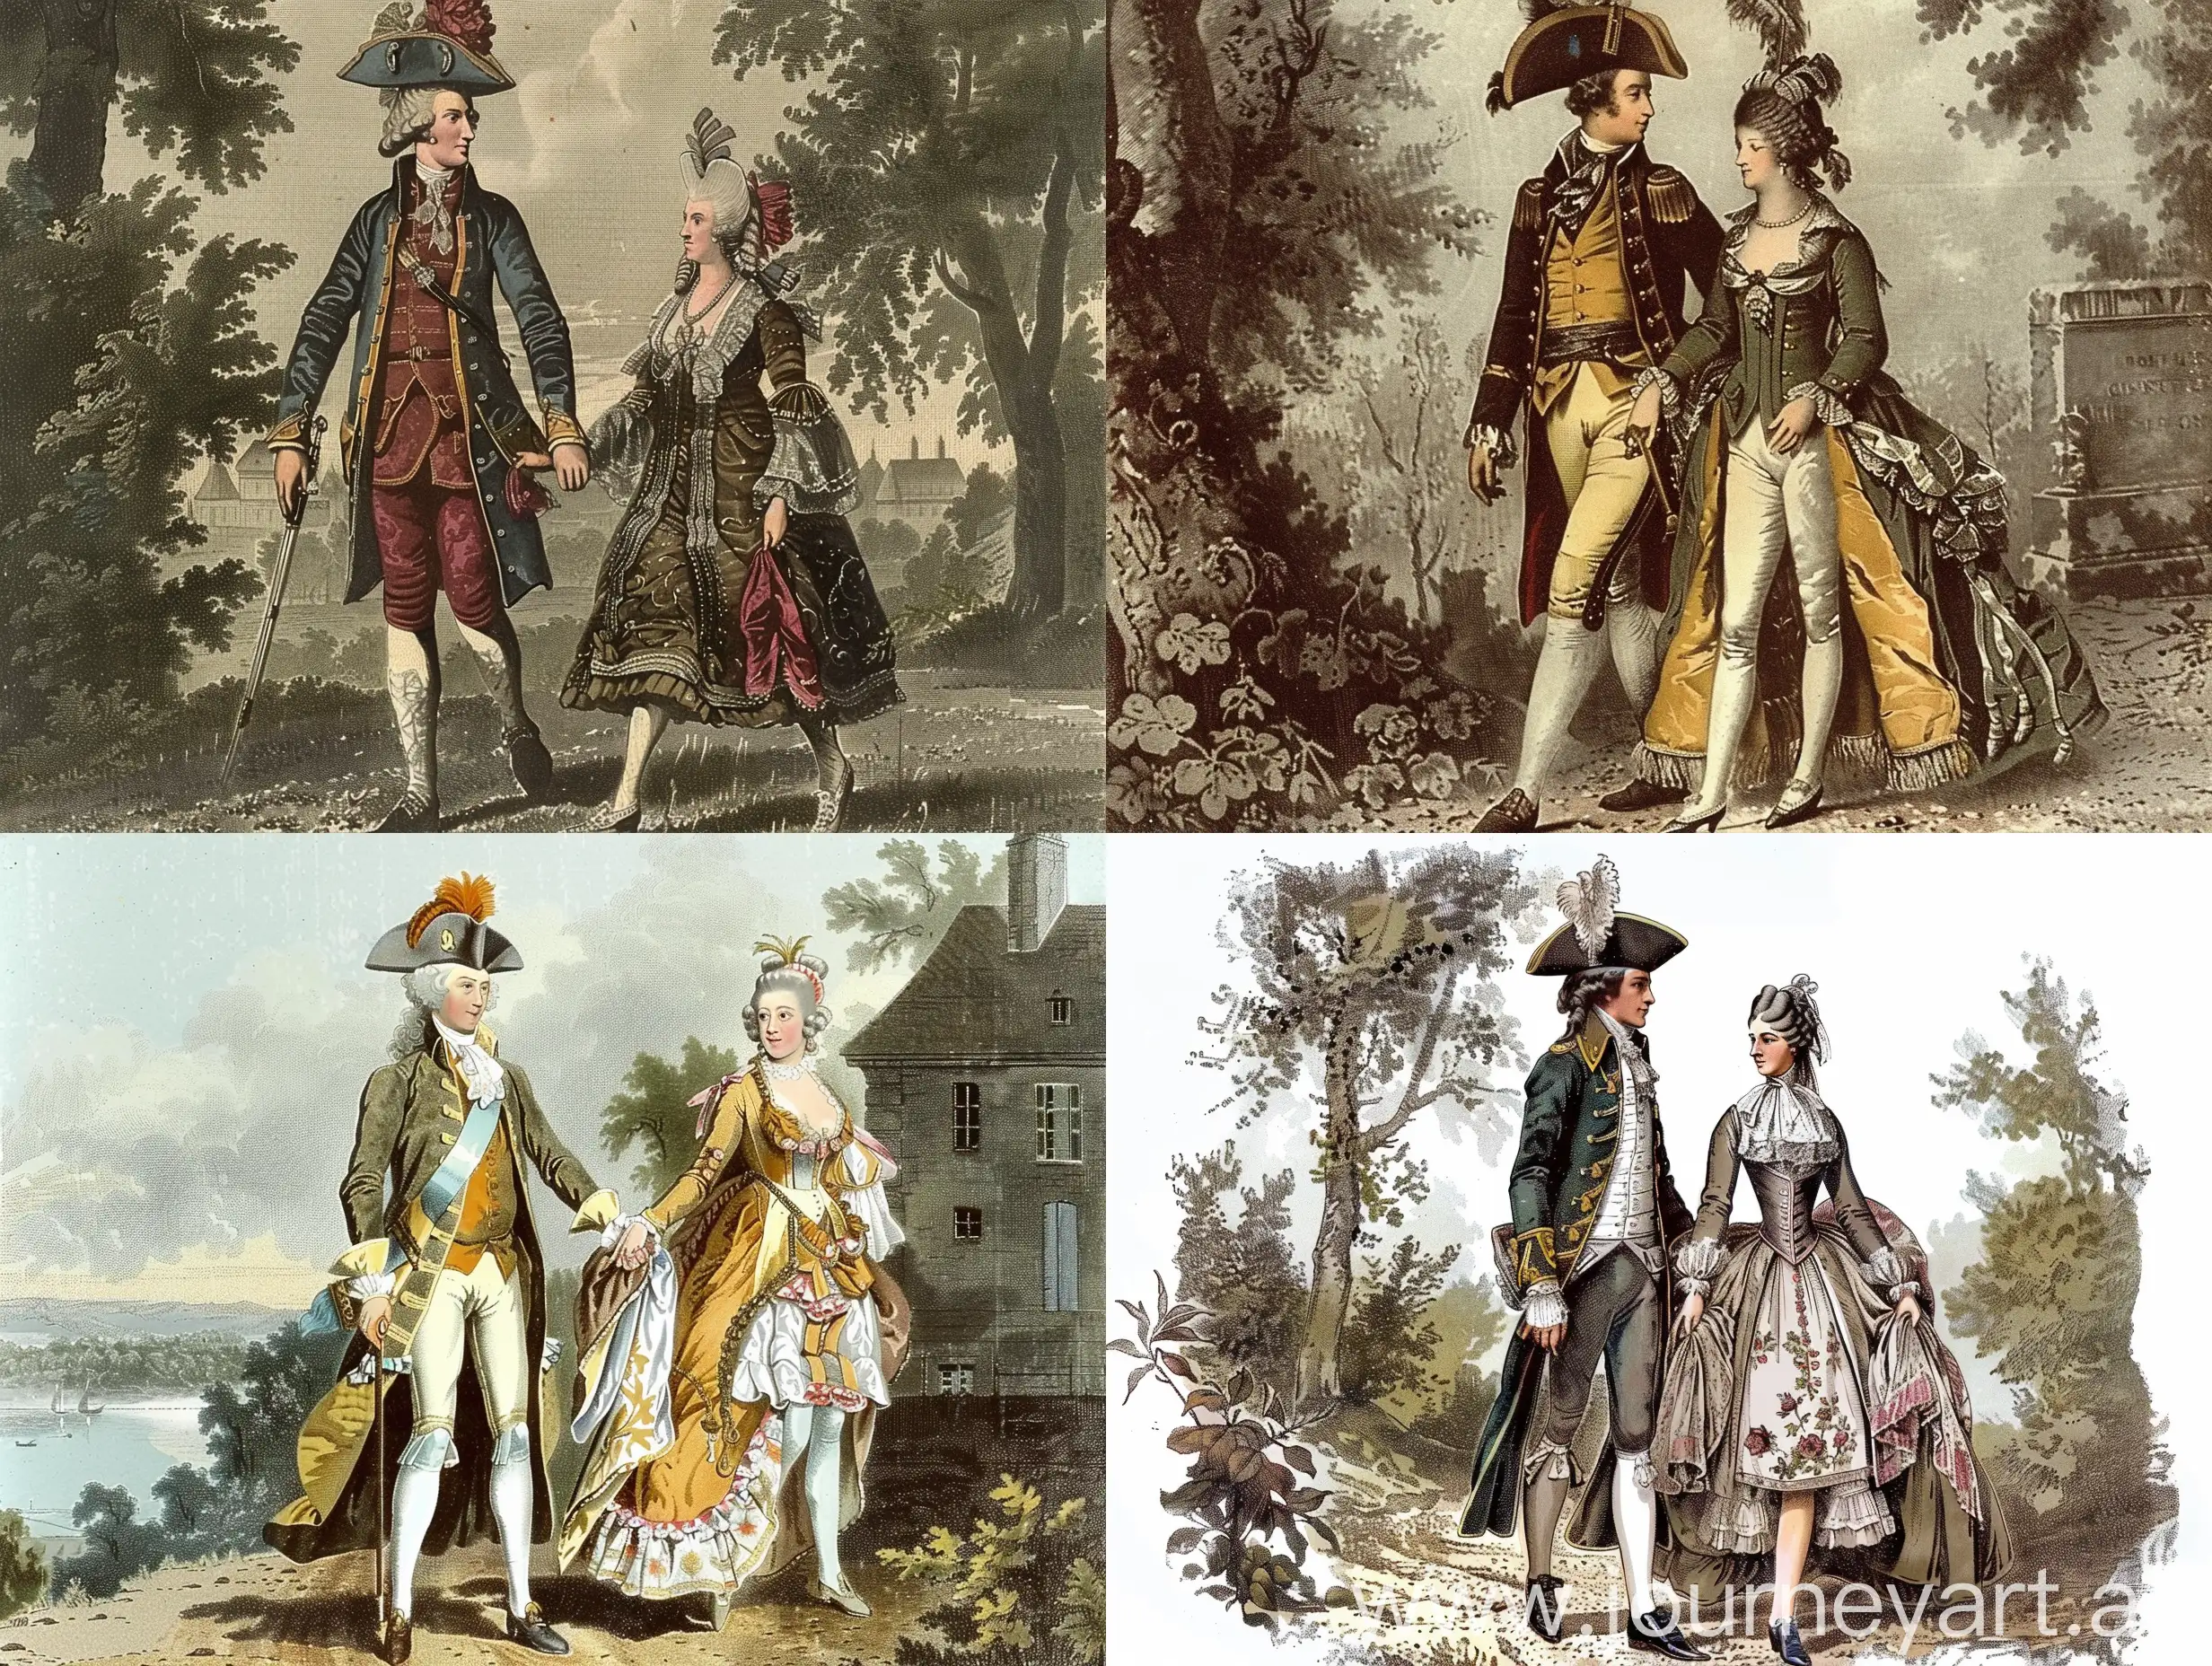 a 1798 French general and his wife walking together, both wearing fashions of late 1790s